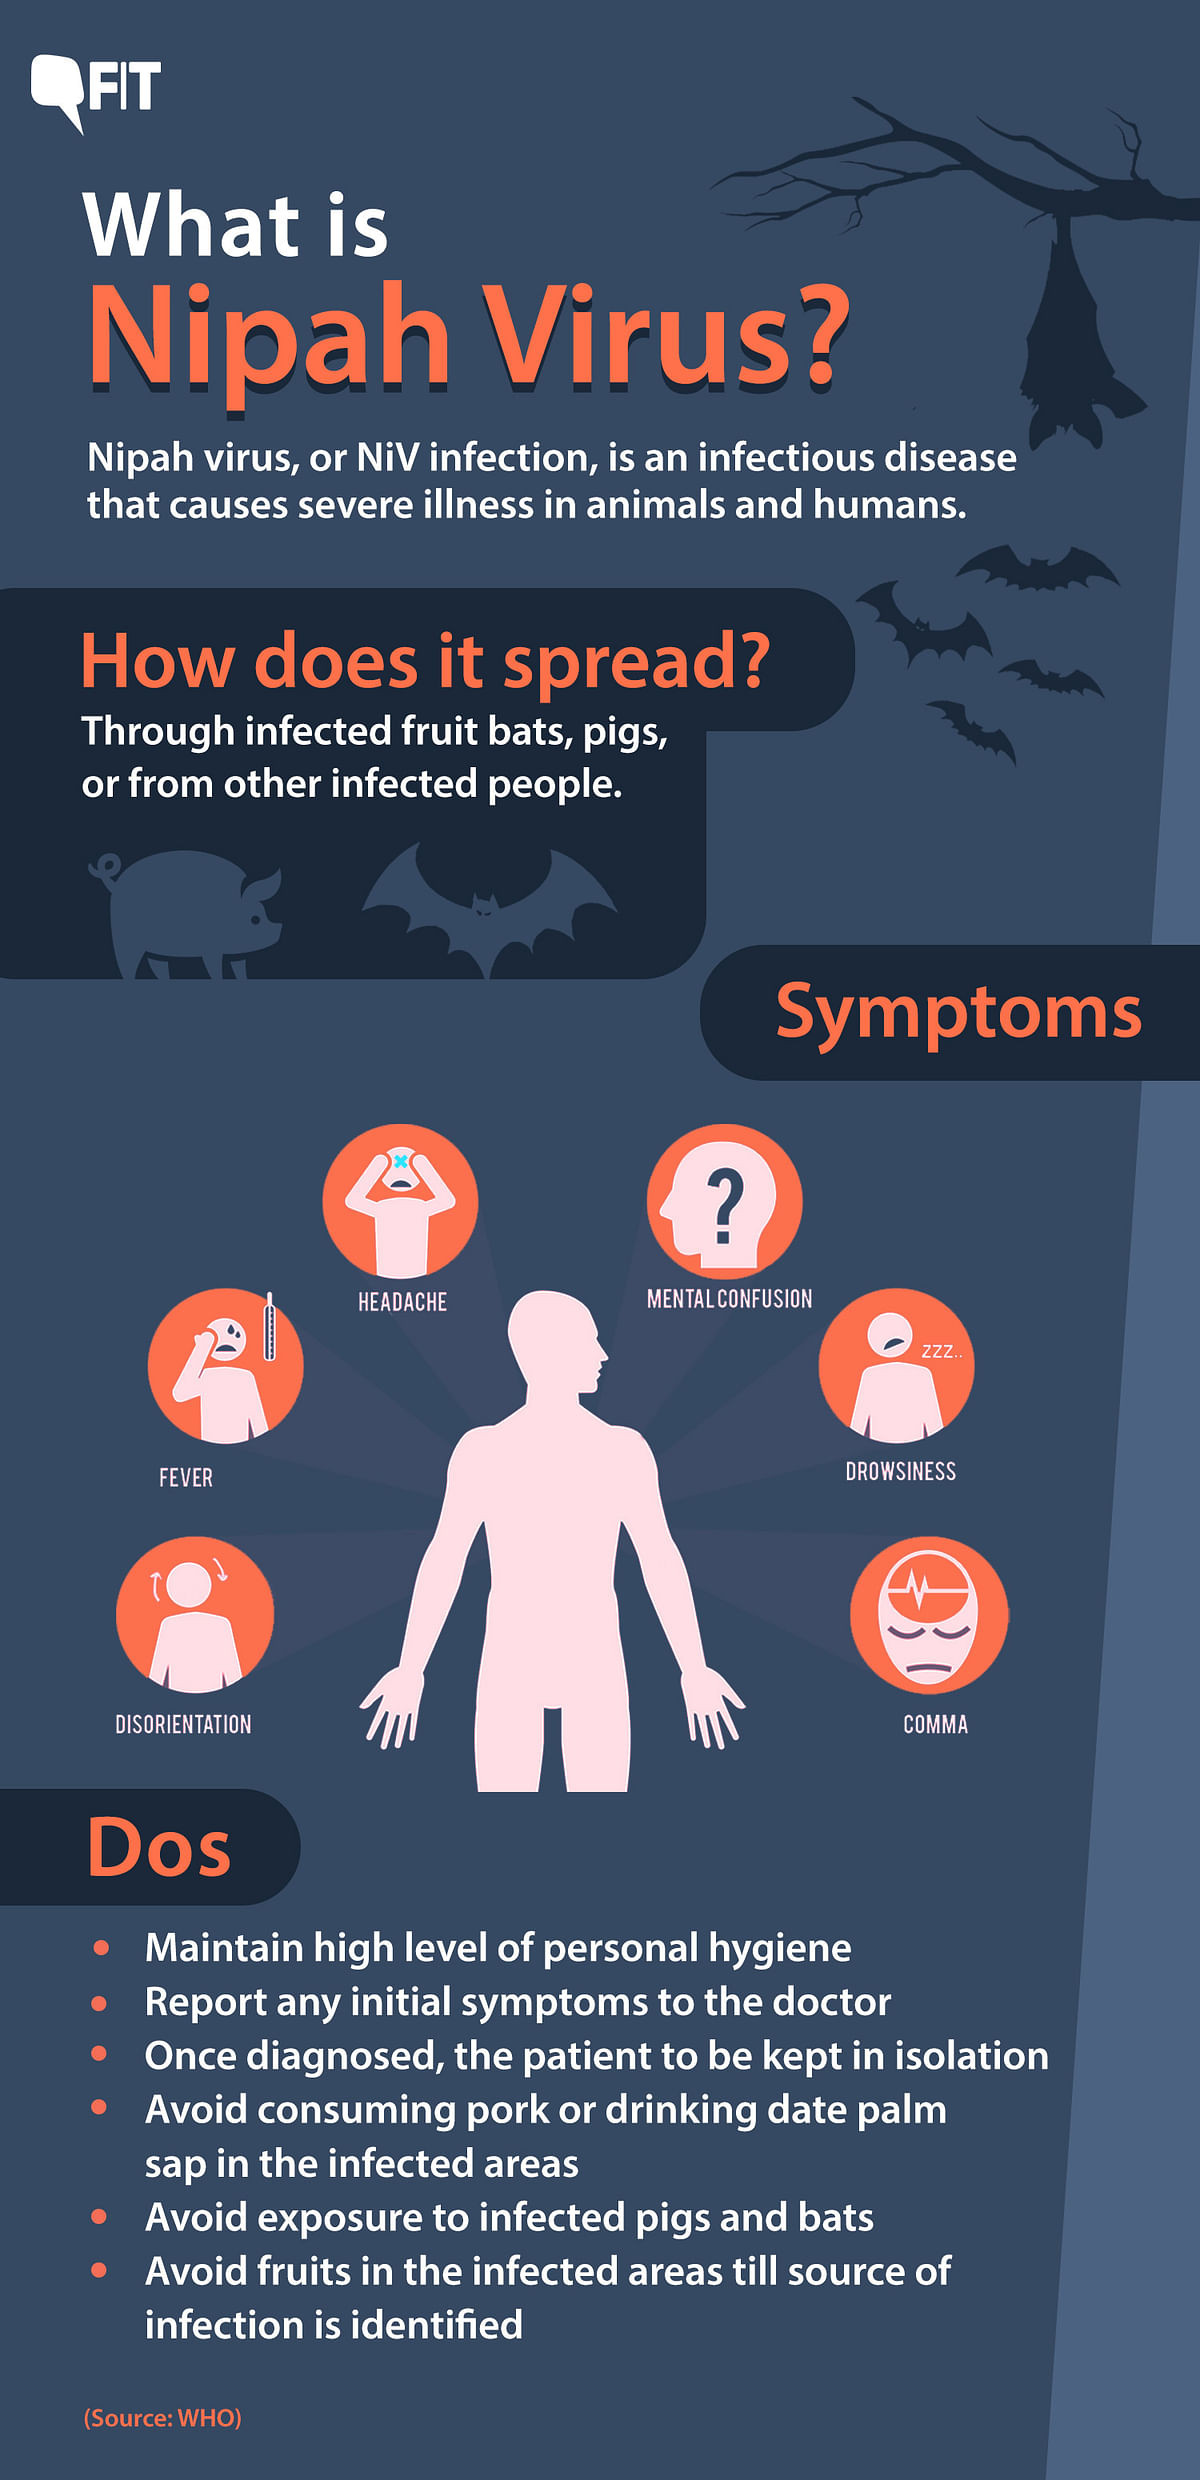 Nipah virus infection is a newly emerging infectious disease that causes severe illness in both animals & humans.